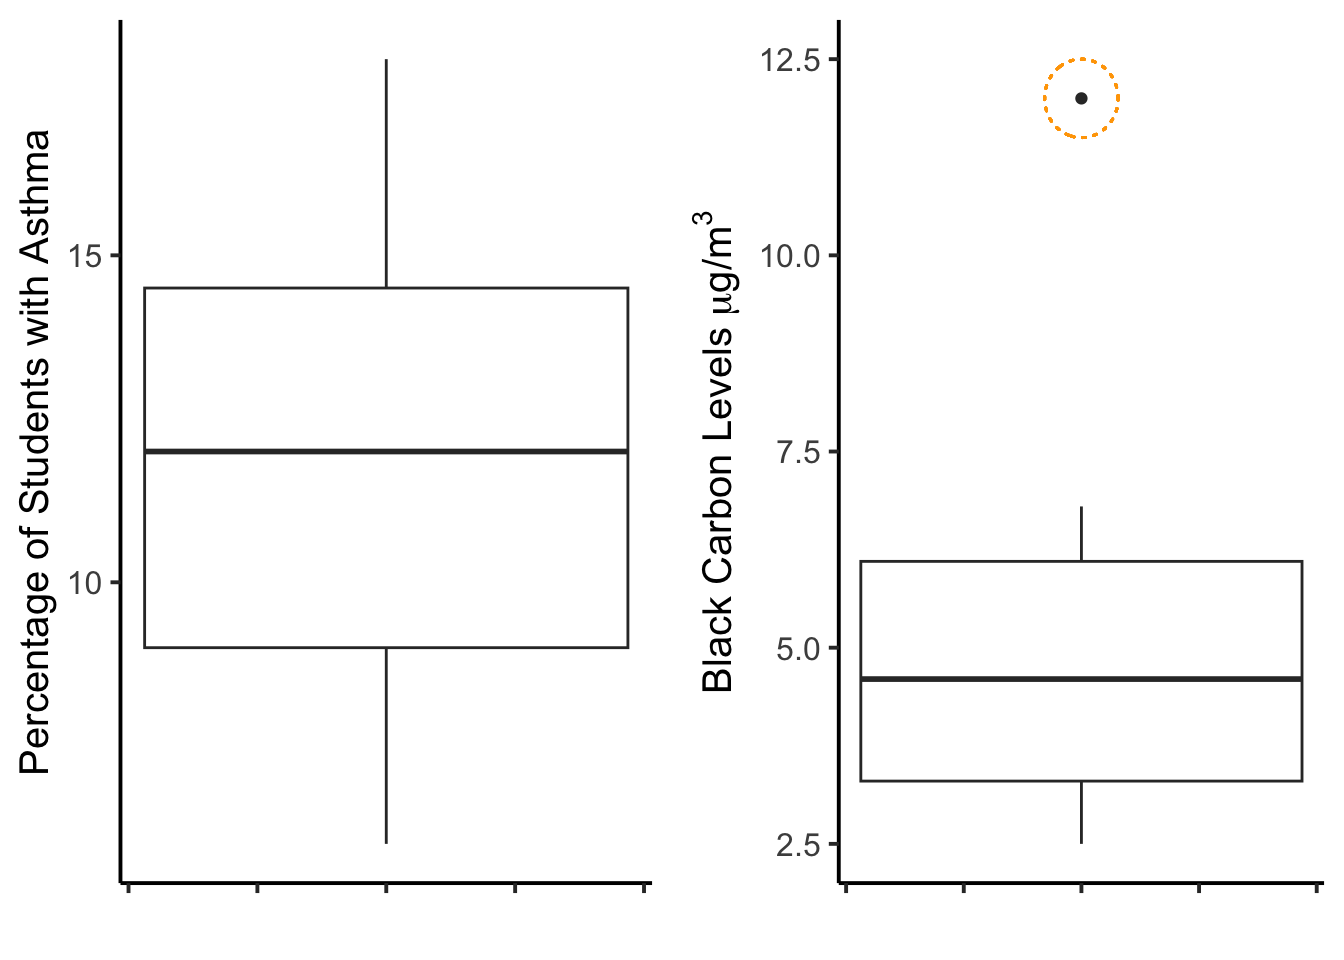 Boxplots for two sets of data; the one on the right has an outlier.